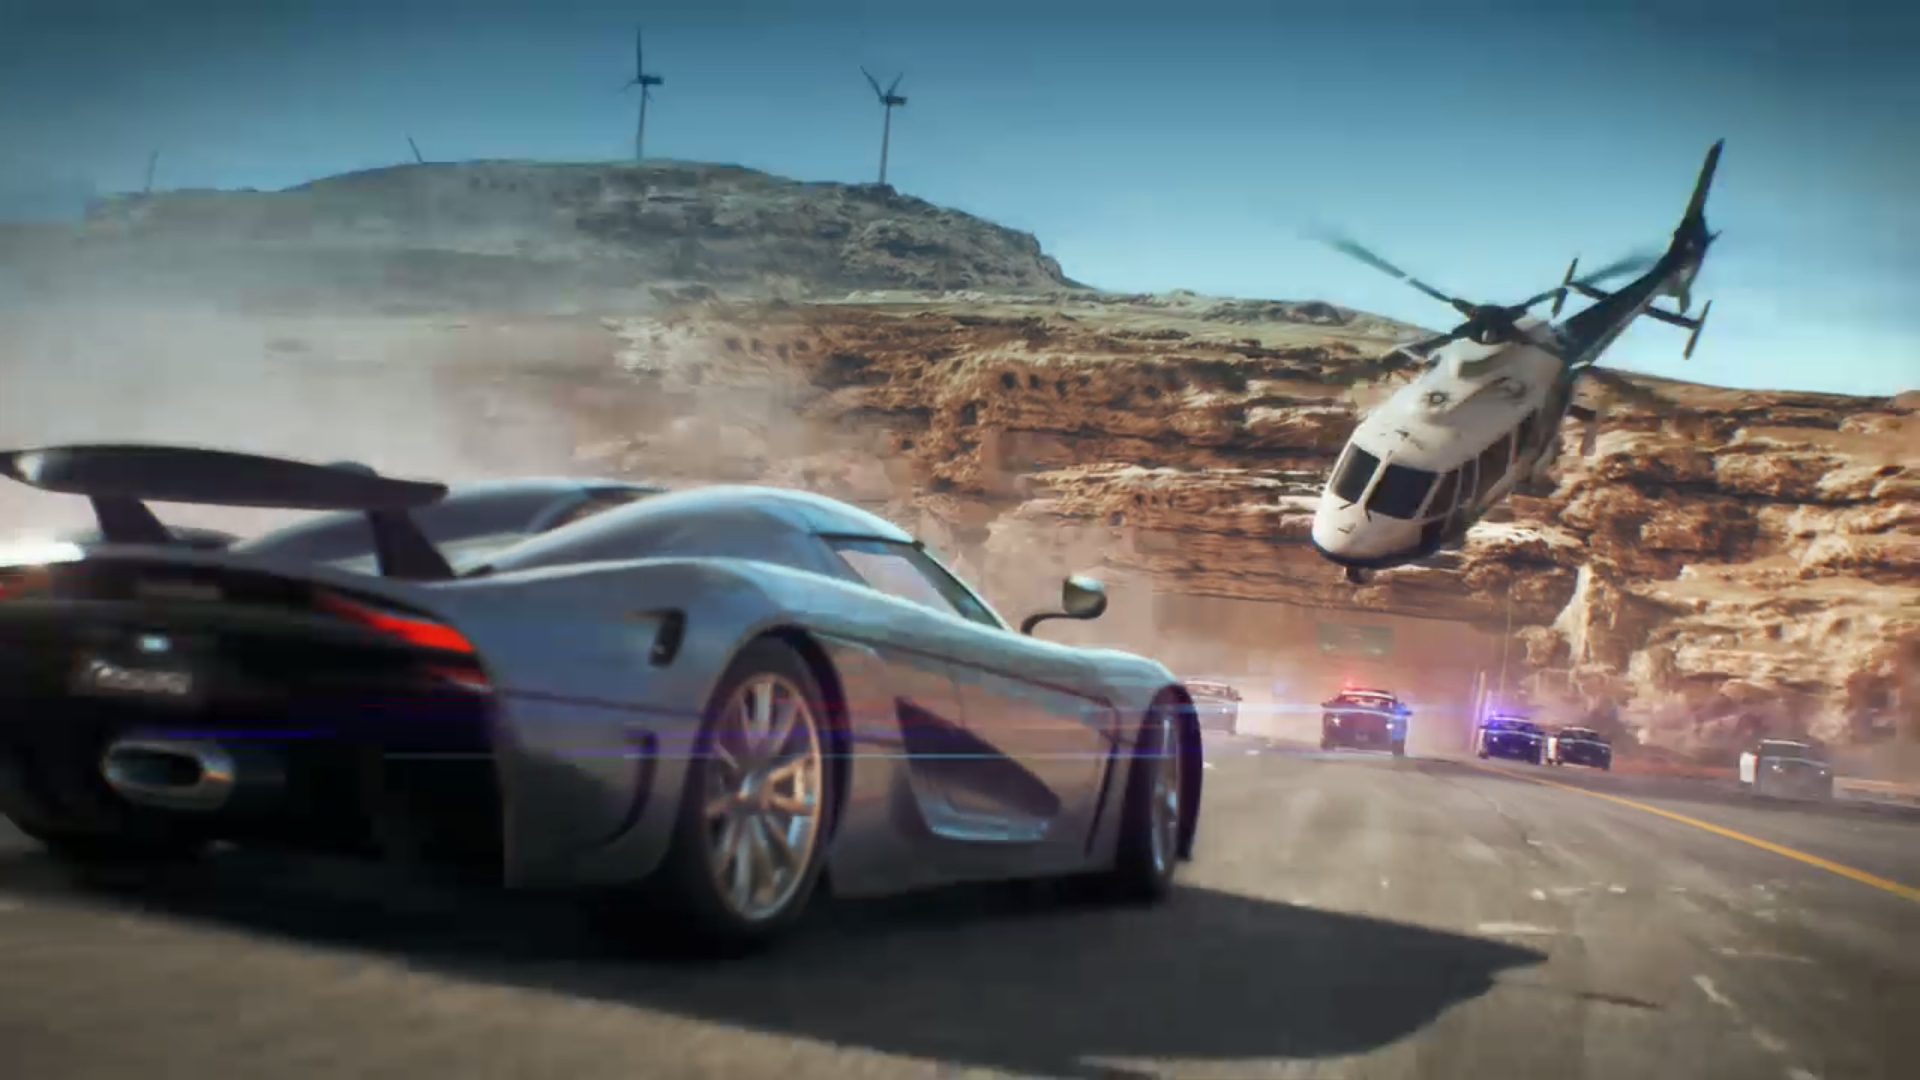 Need For Speed Payback HD Wallpaper And Background Image